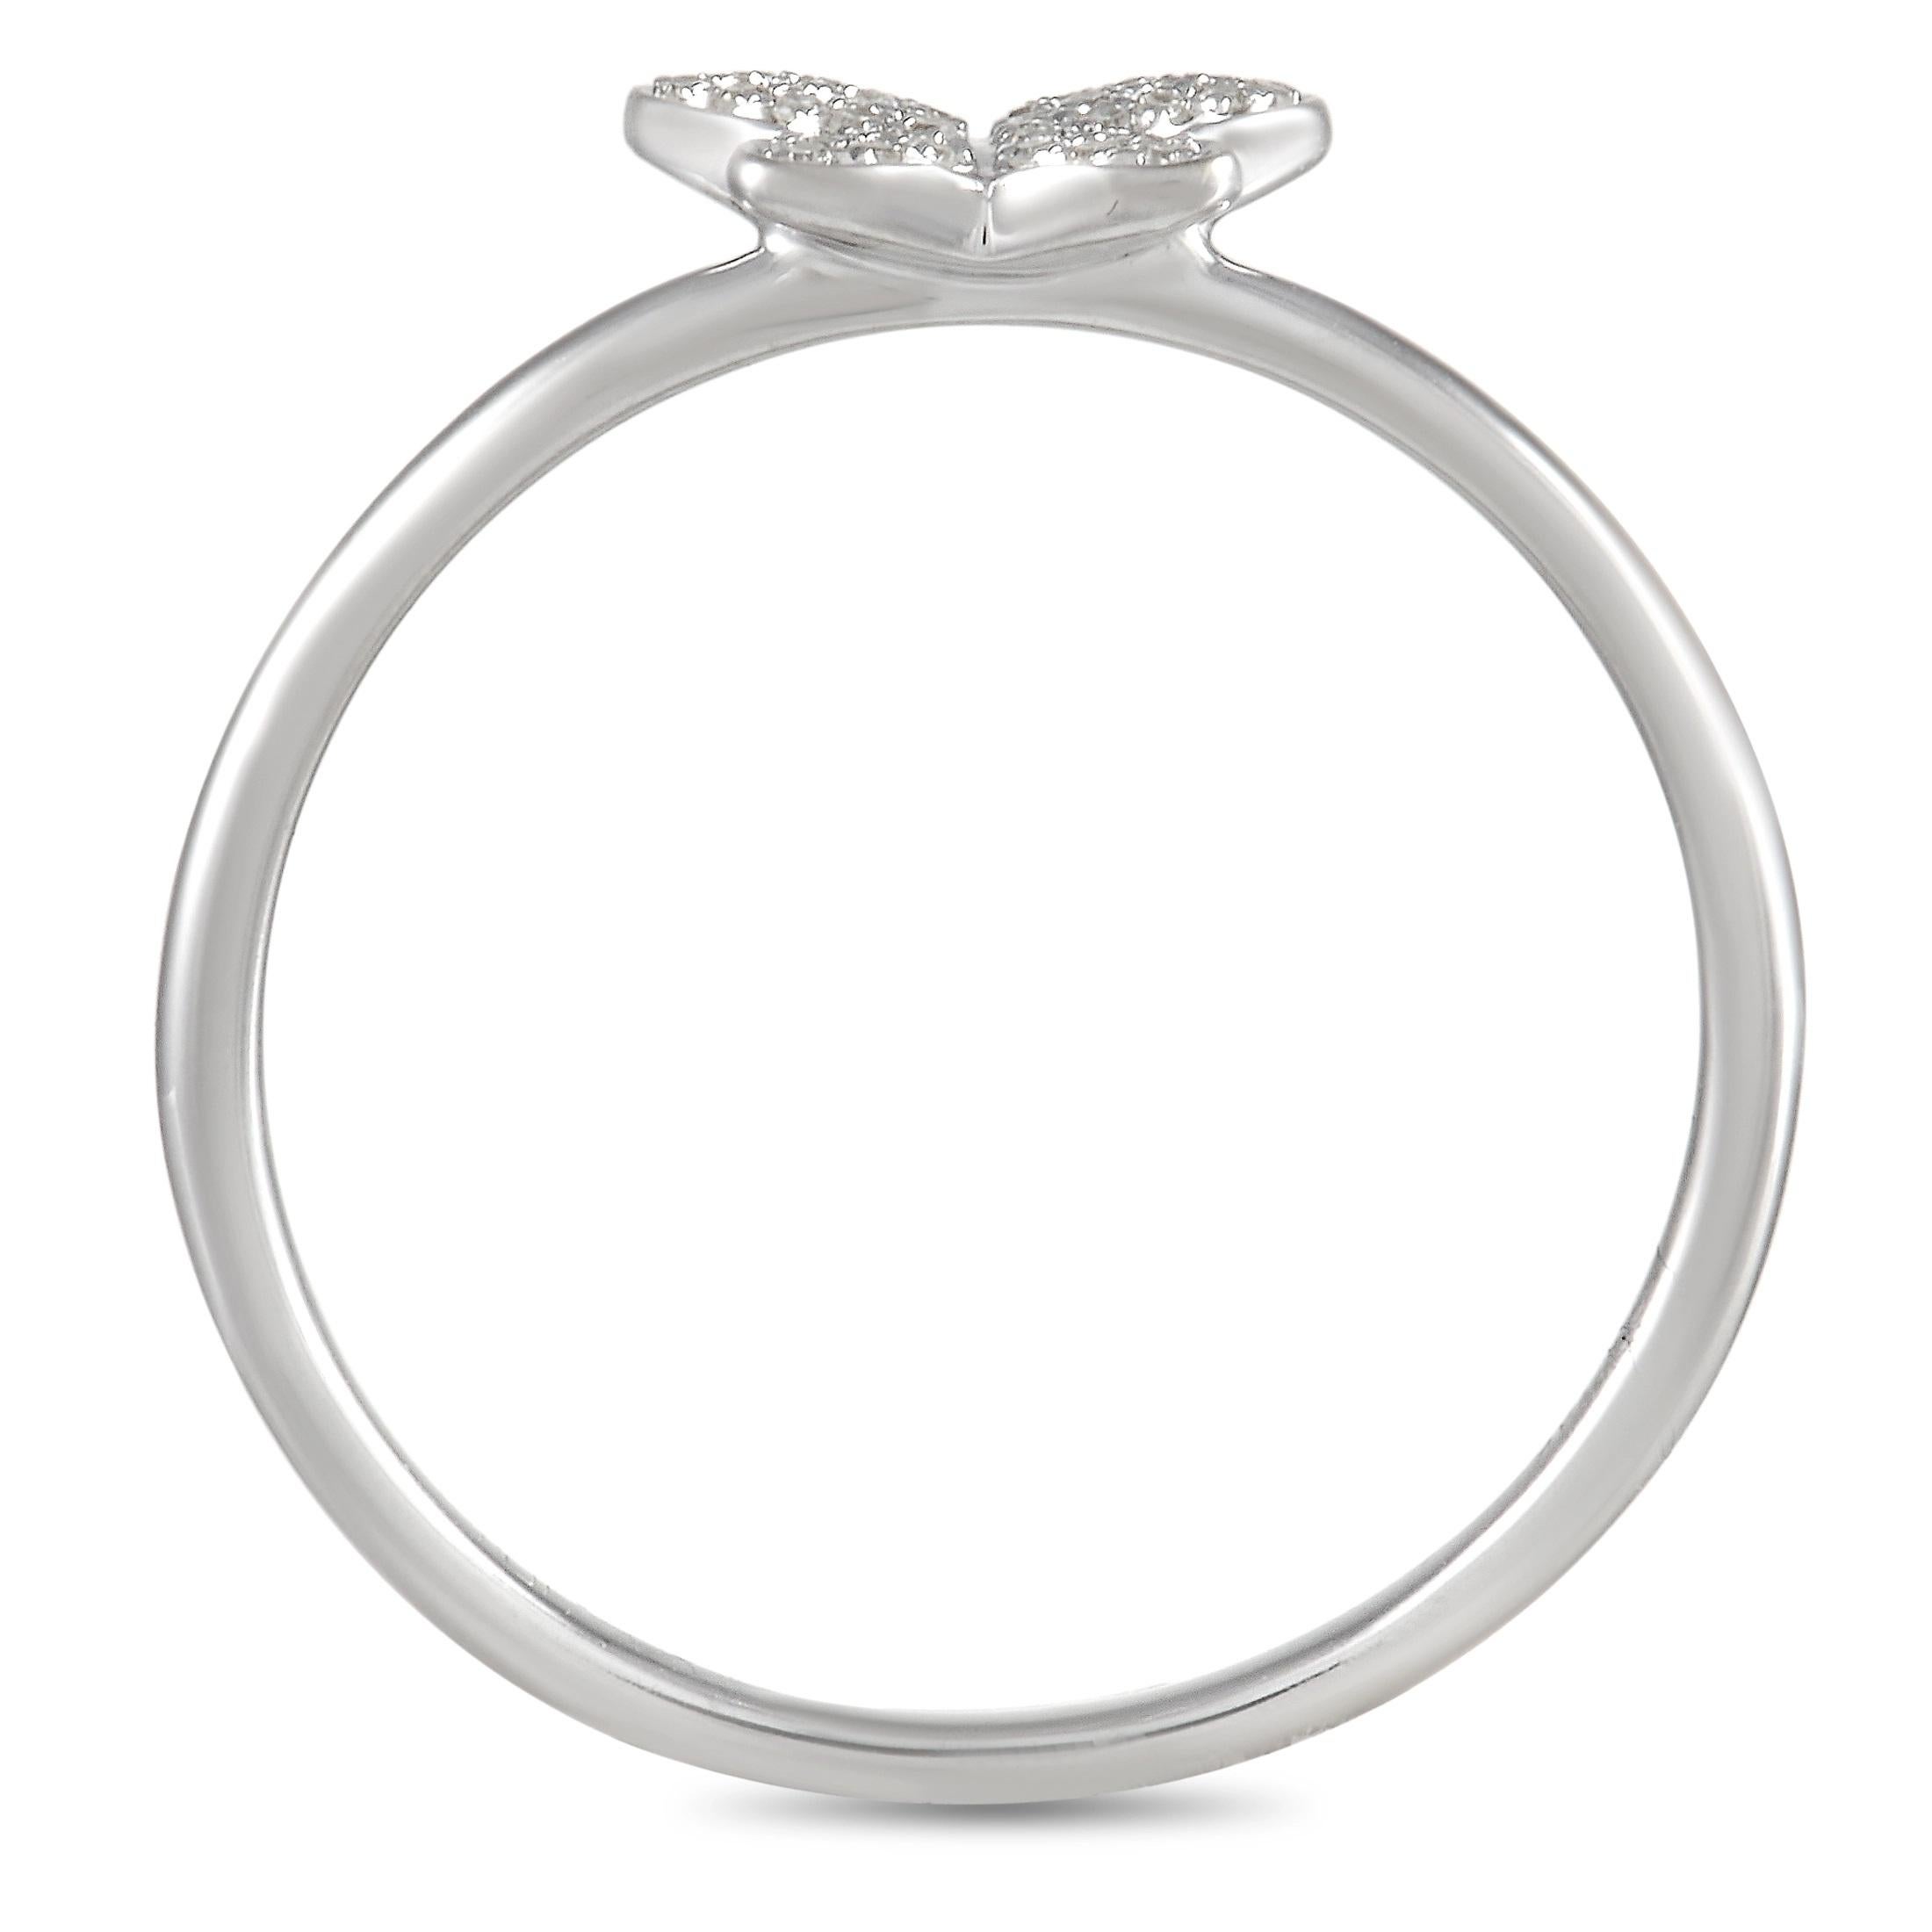 A sweet butterfly-shaped accent covered in diamonds with a total weight of 0.08 carats make this a charming addition to any jewelry collection. Sleek and simple, this understated piece features a 14K White Gold setting with a 1mm wide band and a